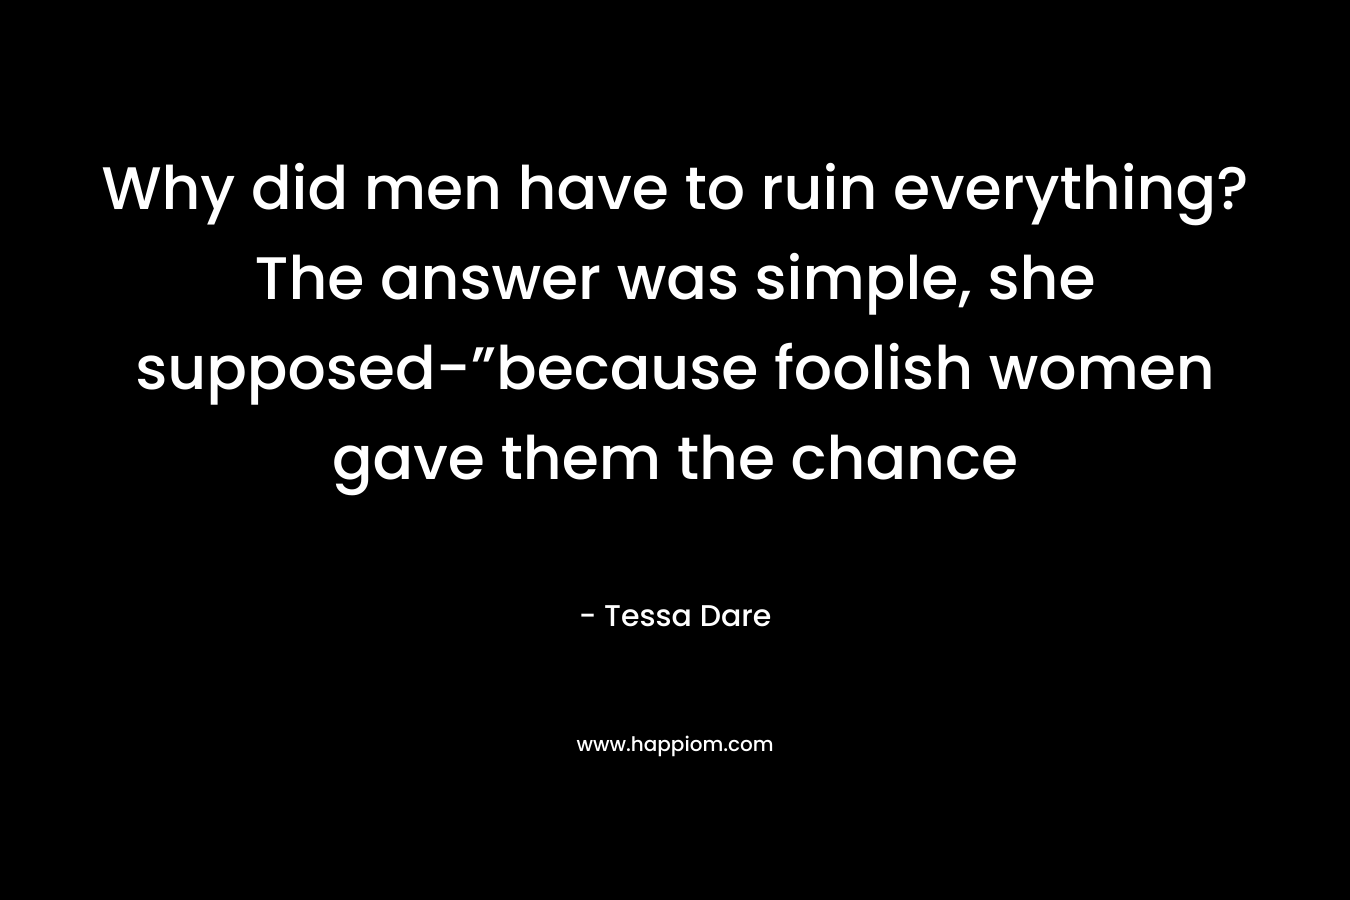 Why did men have to ruin everything? The answer was simple, she supposed-”because foolish women gave them the chance – Tessa Dare